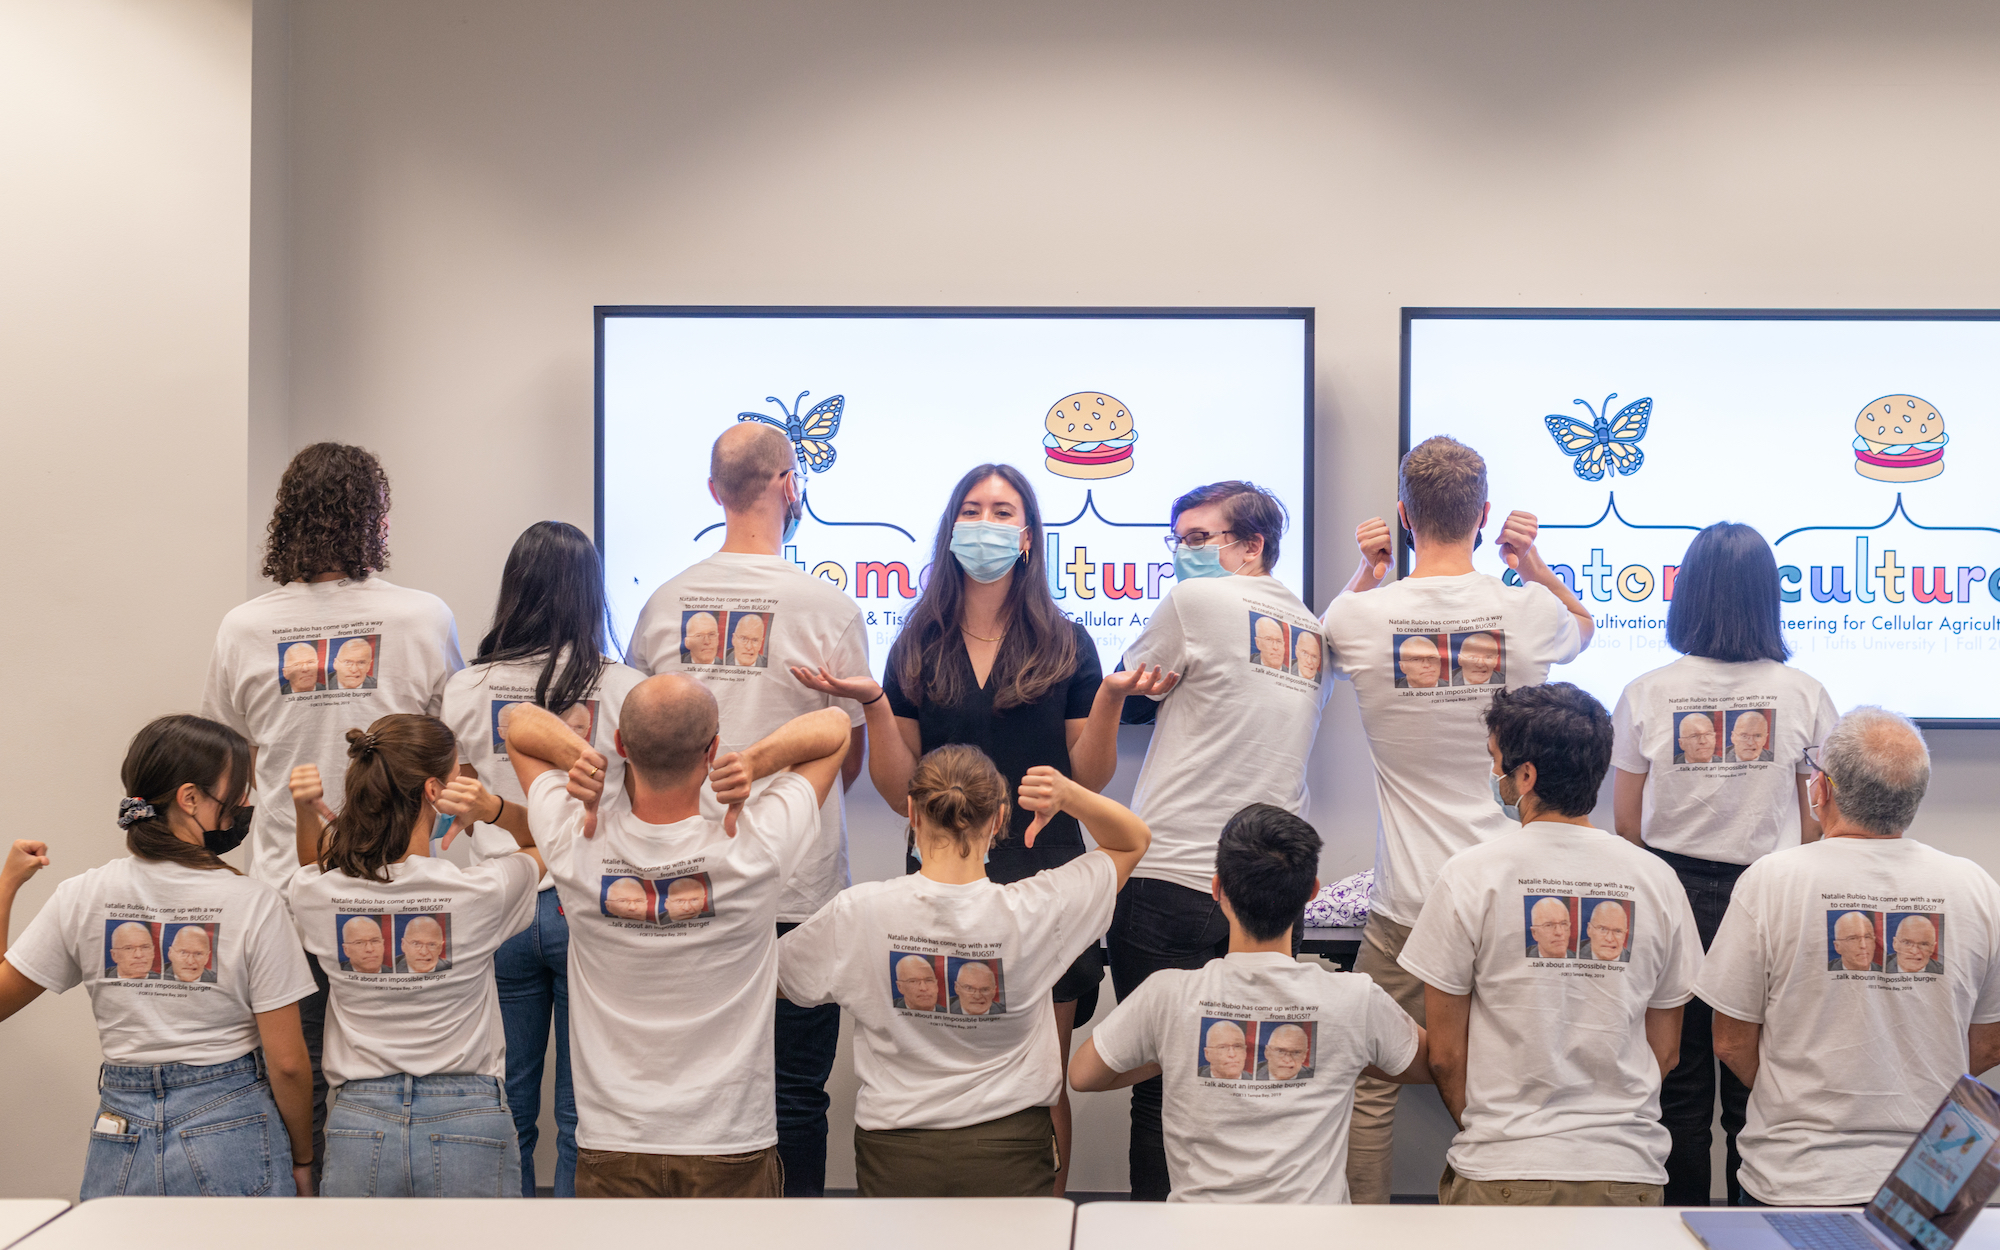 group of 14 photo of everyone (except for main researcher in center) wearing the same white t-shirt turned around pointing to the back of the shirt that has a meme